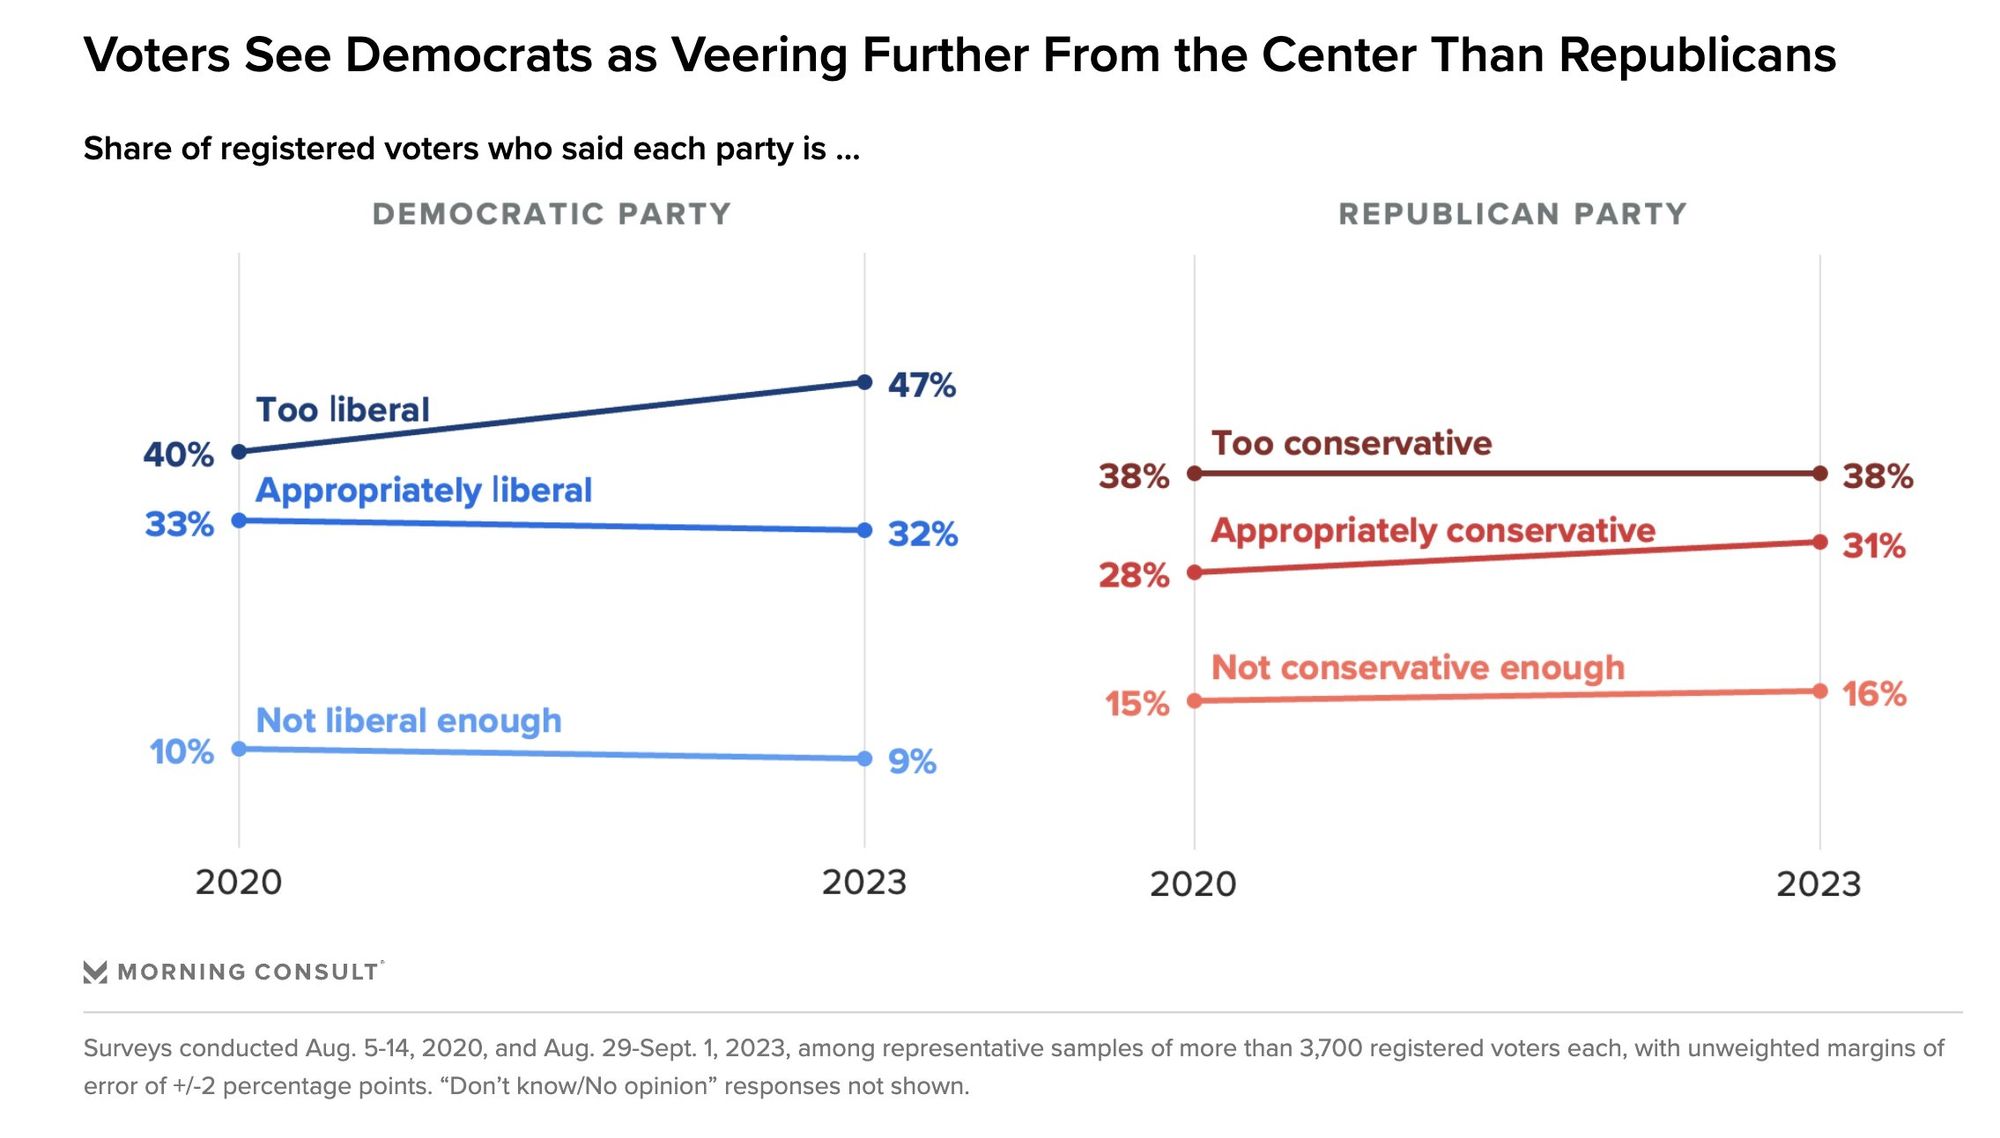 Voters see Democrats as veering further from the center than Republicans